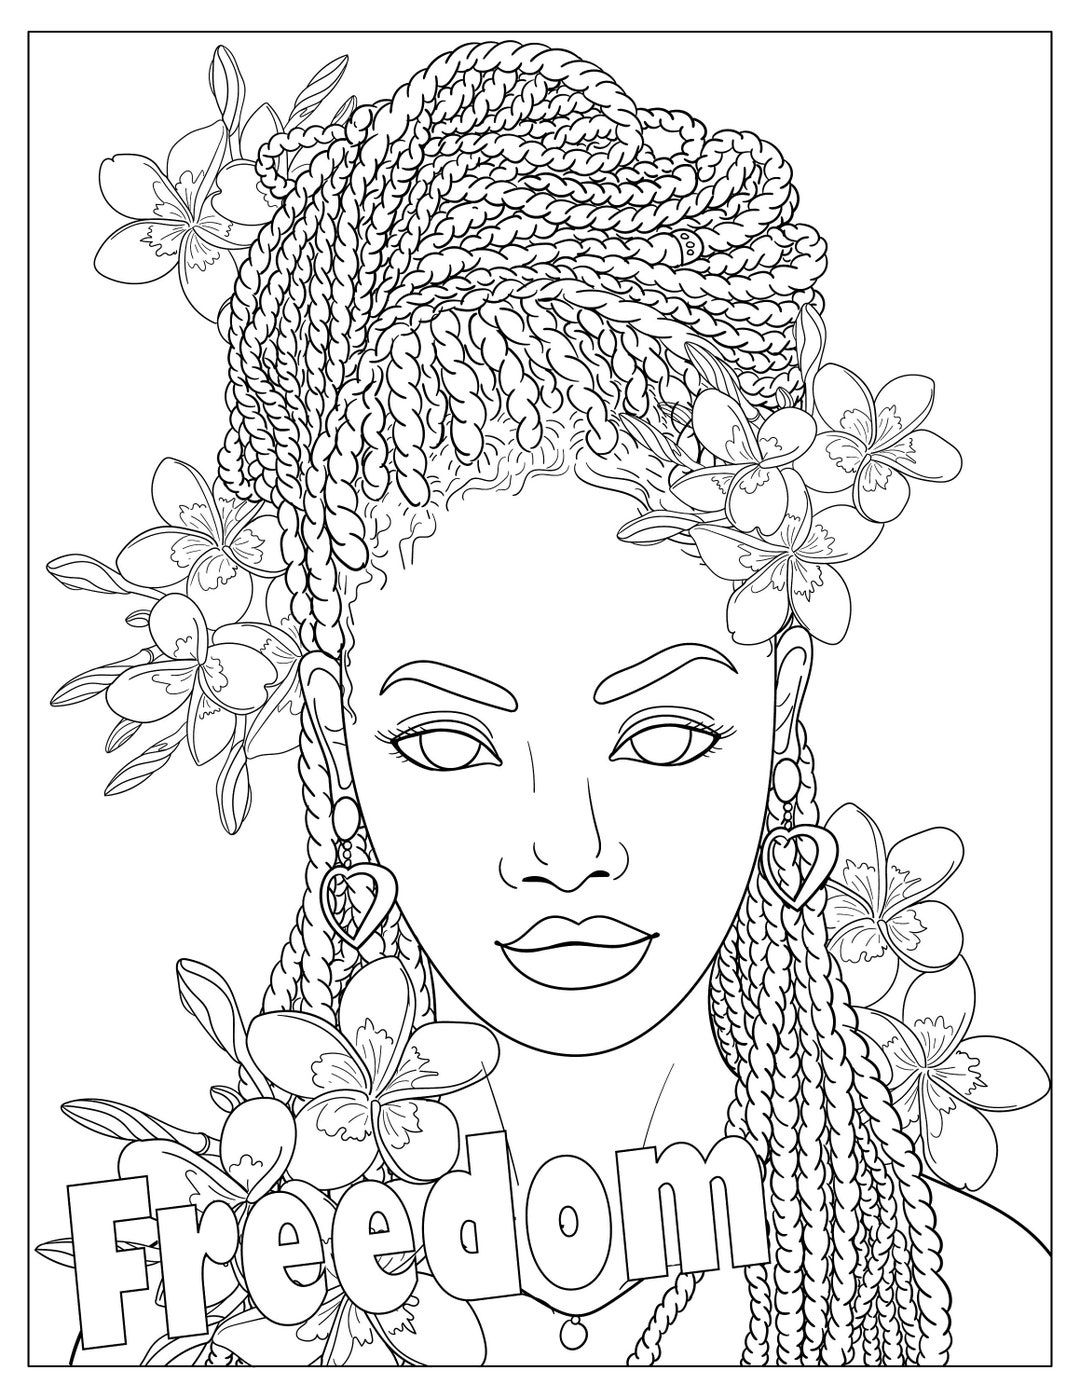 Freedom Coloring Page Black Woman Coloring Page Printable - Etsy People